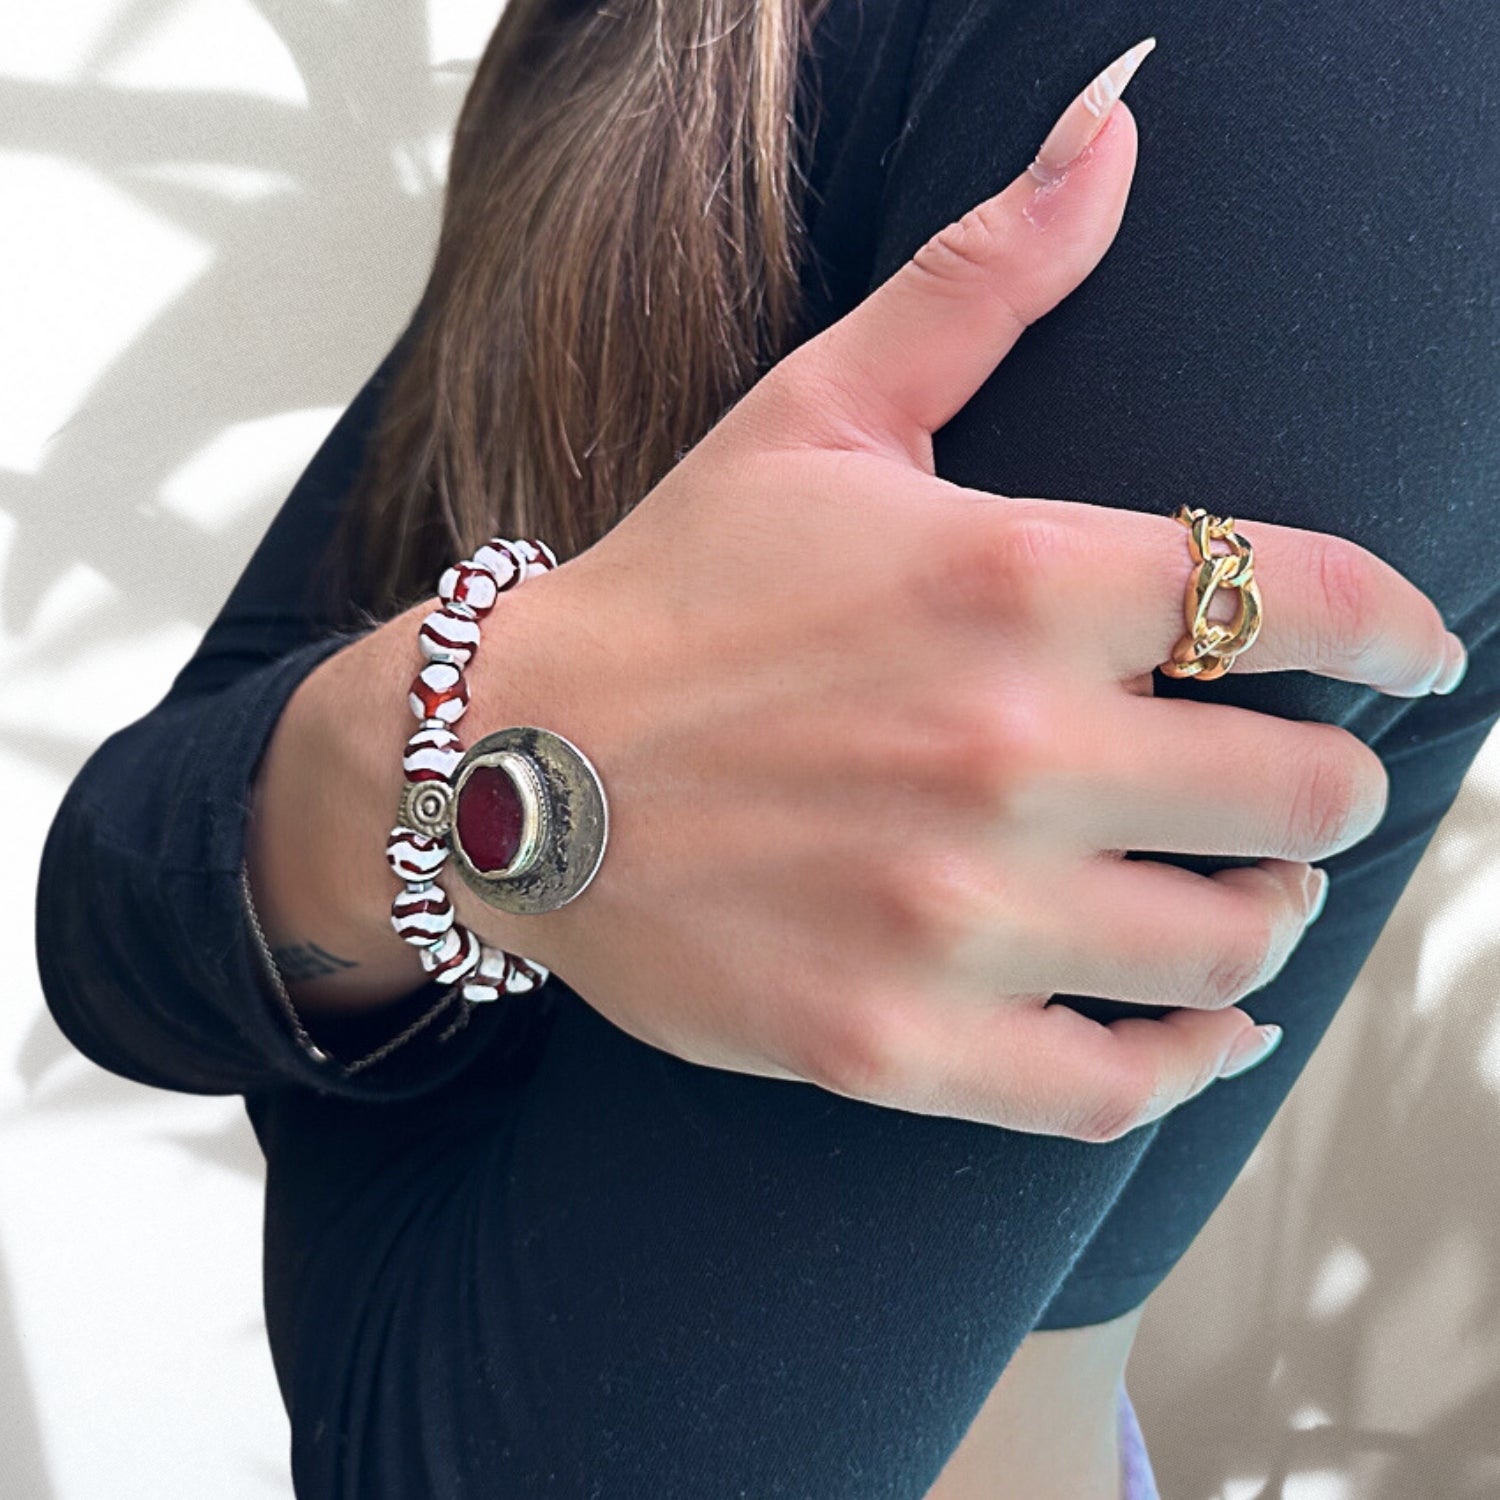 The hand model confidently wears the Royal Abundance Bracelet, symbolizing the enchanting beauty of handcrafted jewelry and personal style.